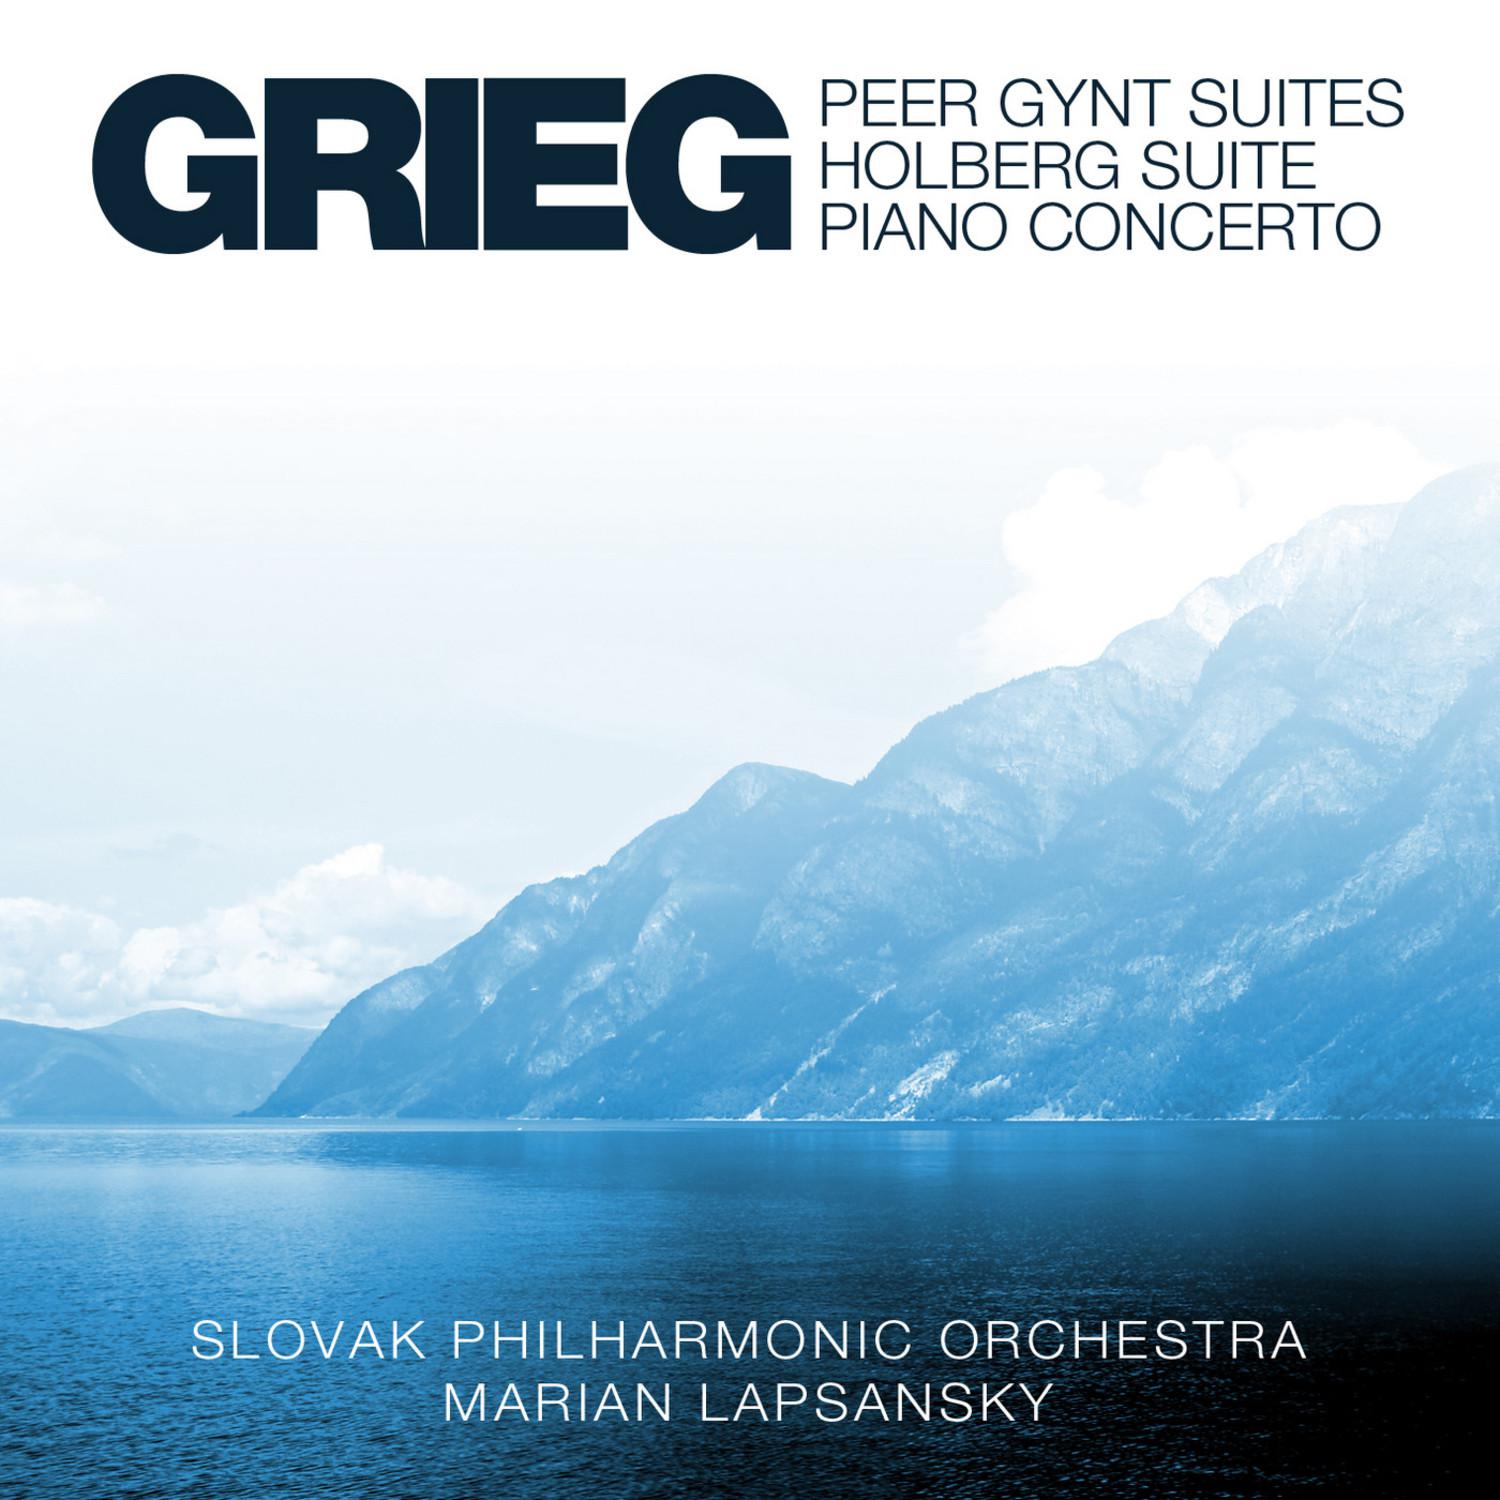 Peer Gynt Suite No. 2, Op. 55: I. Abduction of the Bride and Ingrid's Lament: Allegro furioso - Andante